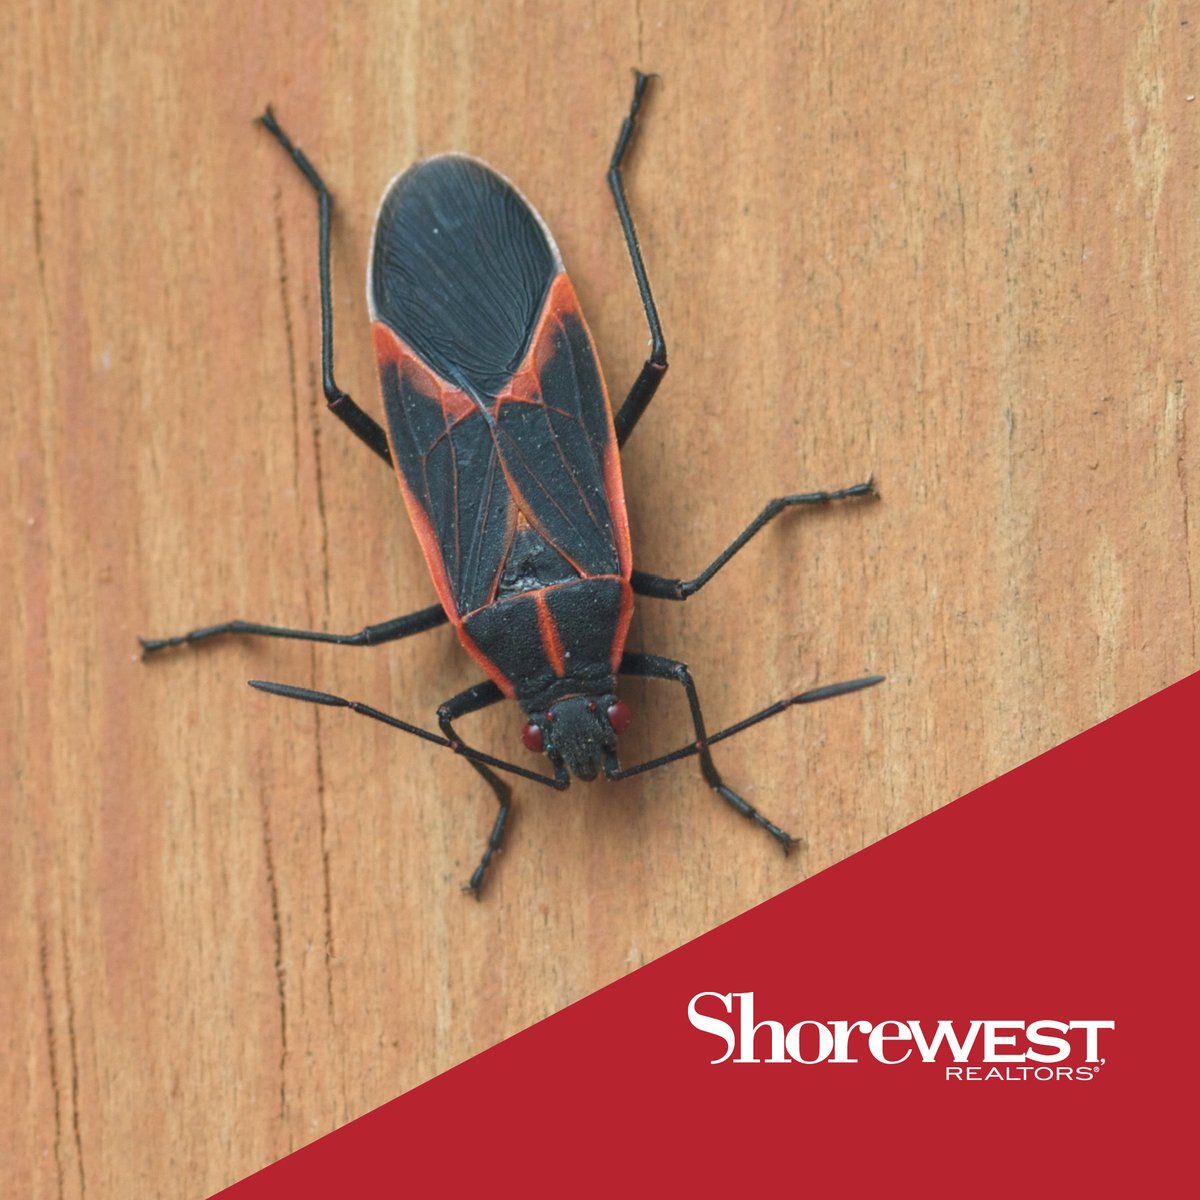 Struggling with Box Elder Bugs in your home and yard? Plant mint, lavender and sage in your garden to naturally keep these pests out of your life. Box Elders hate the pungent smell of these plants!

#HelloHomeowner
#ShorewestRealtors 
#WisconsinRealEstate